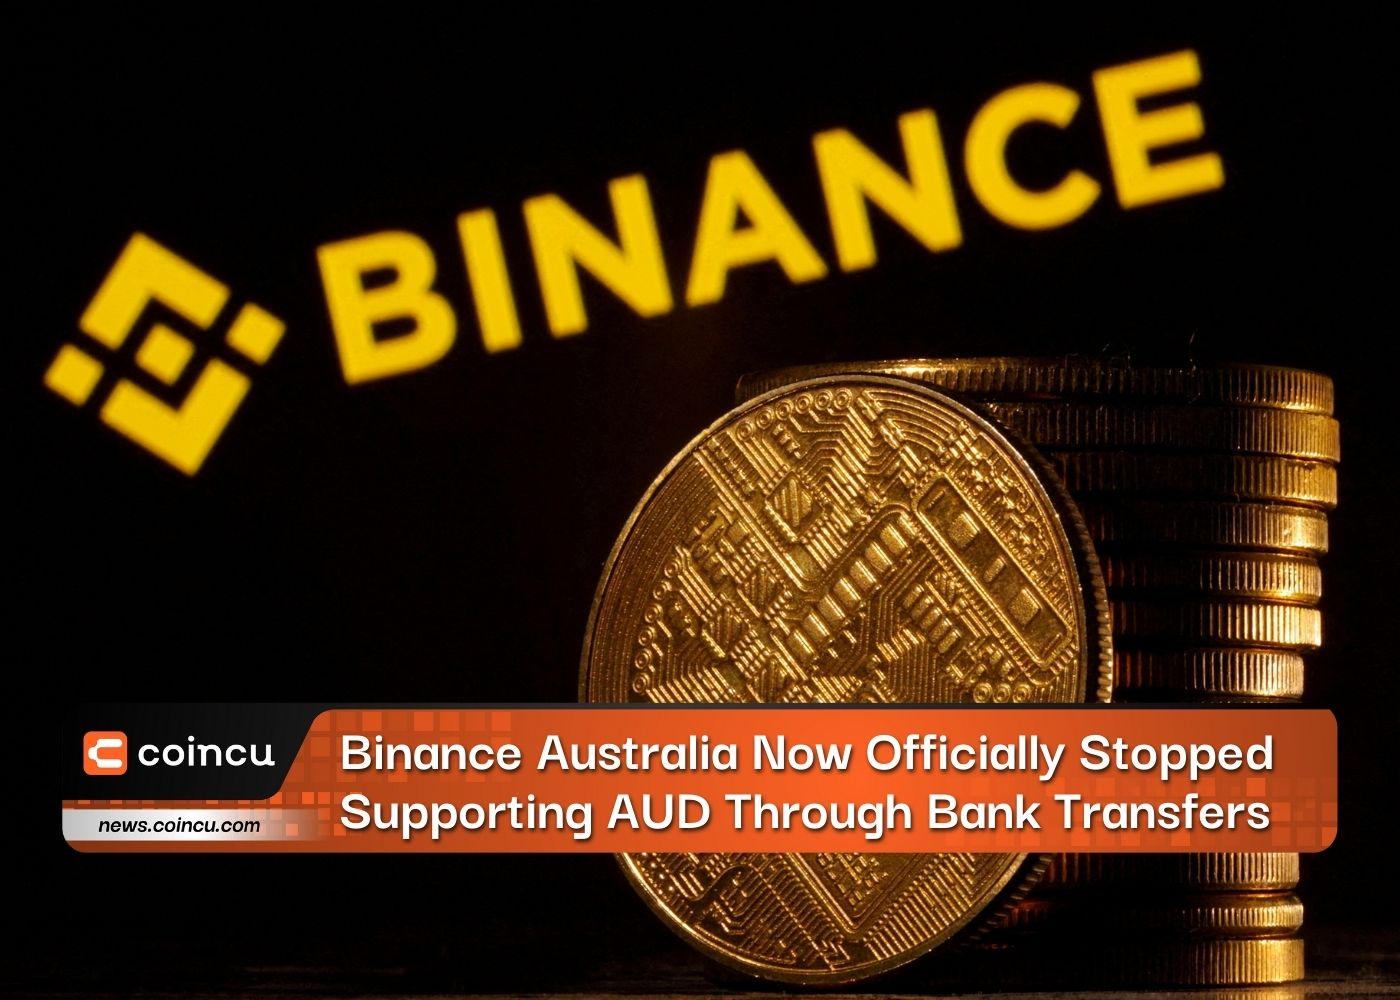 Binance Australia Now Officially Stopped Supporting AUD Through Bank Transfers